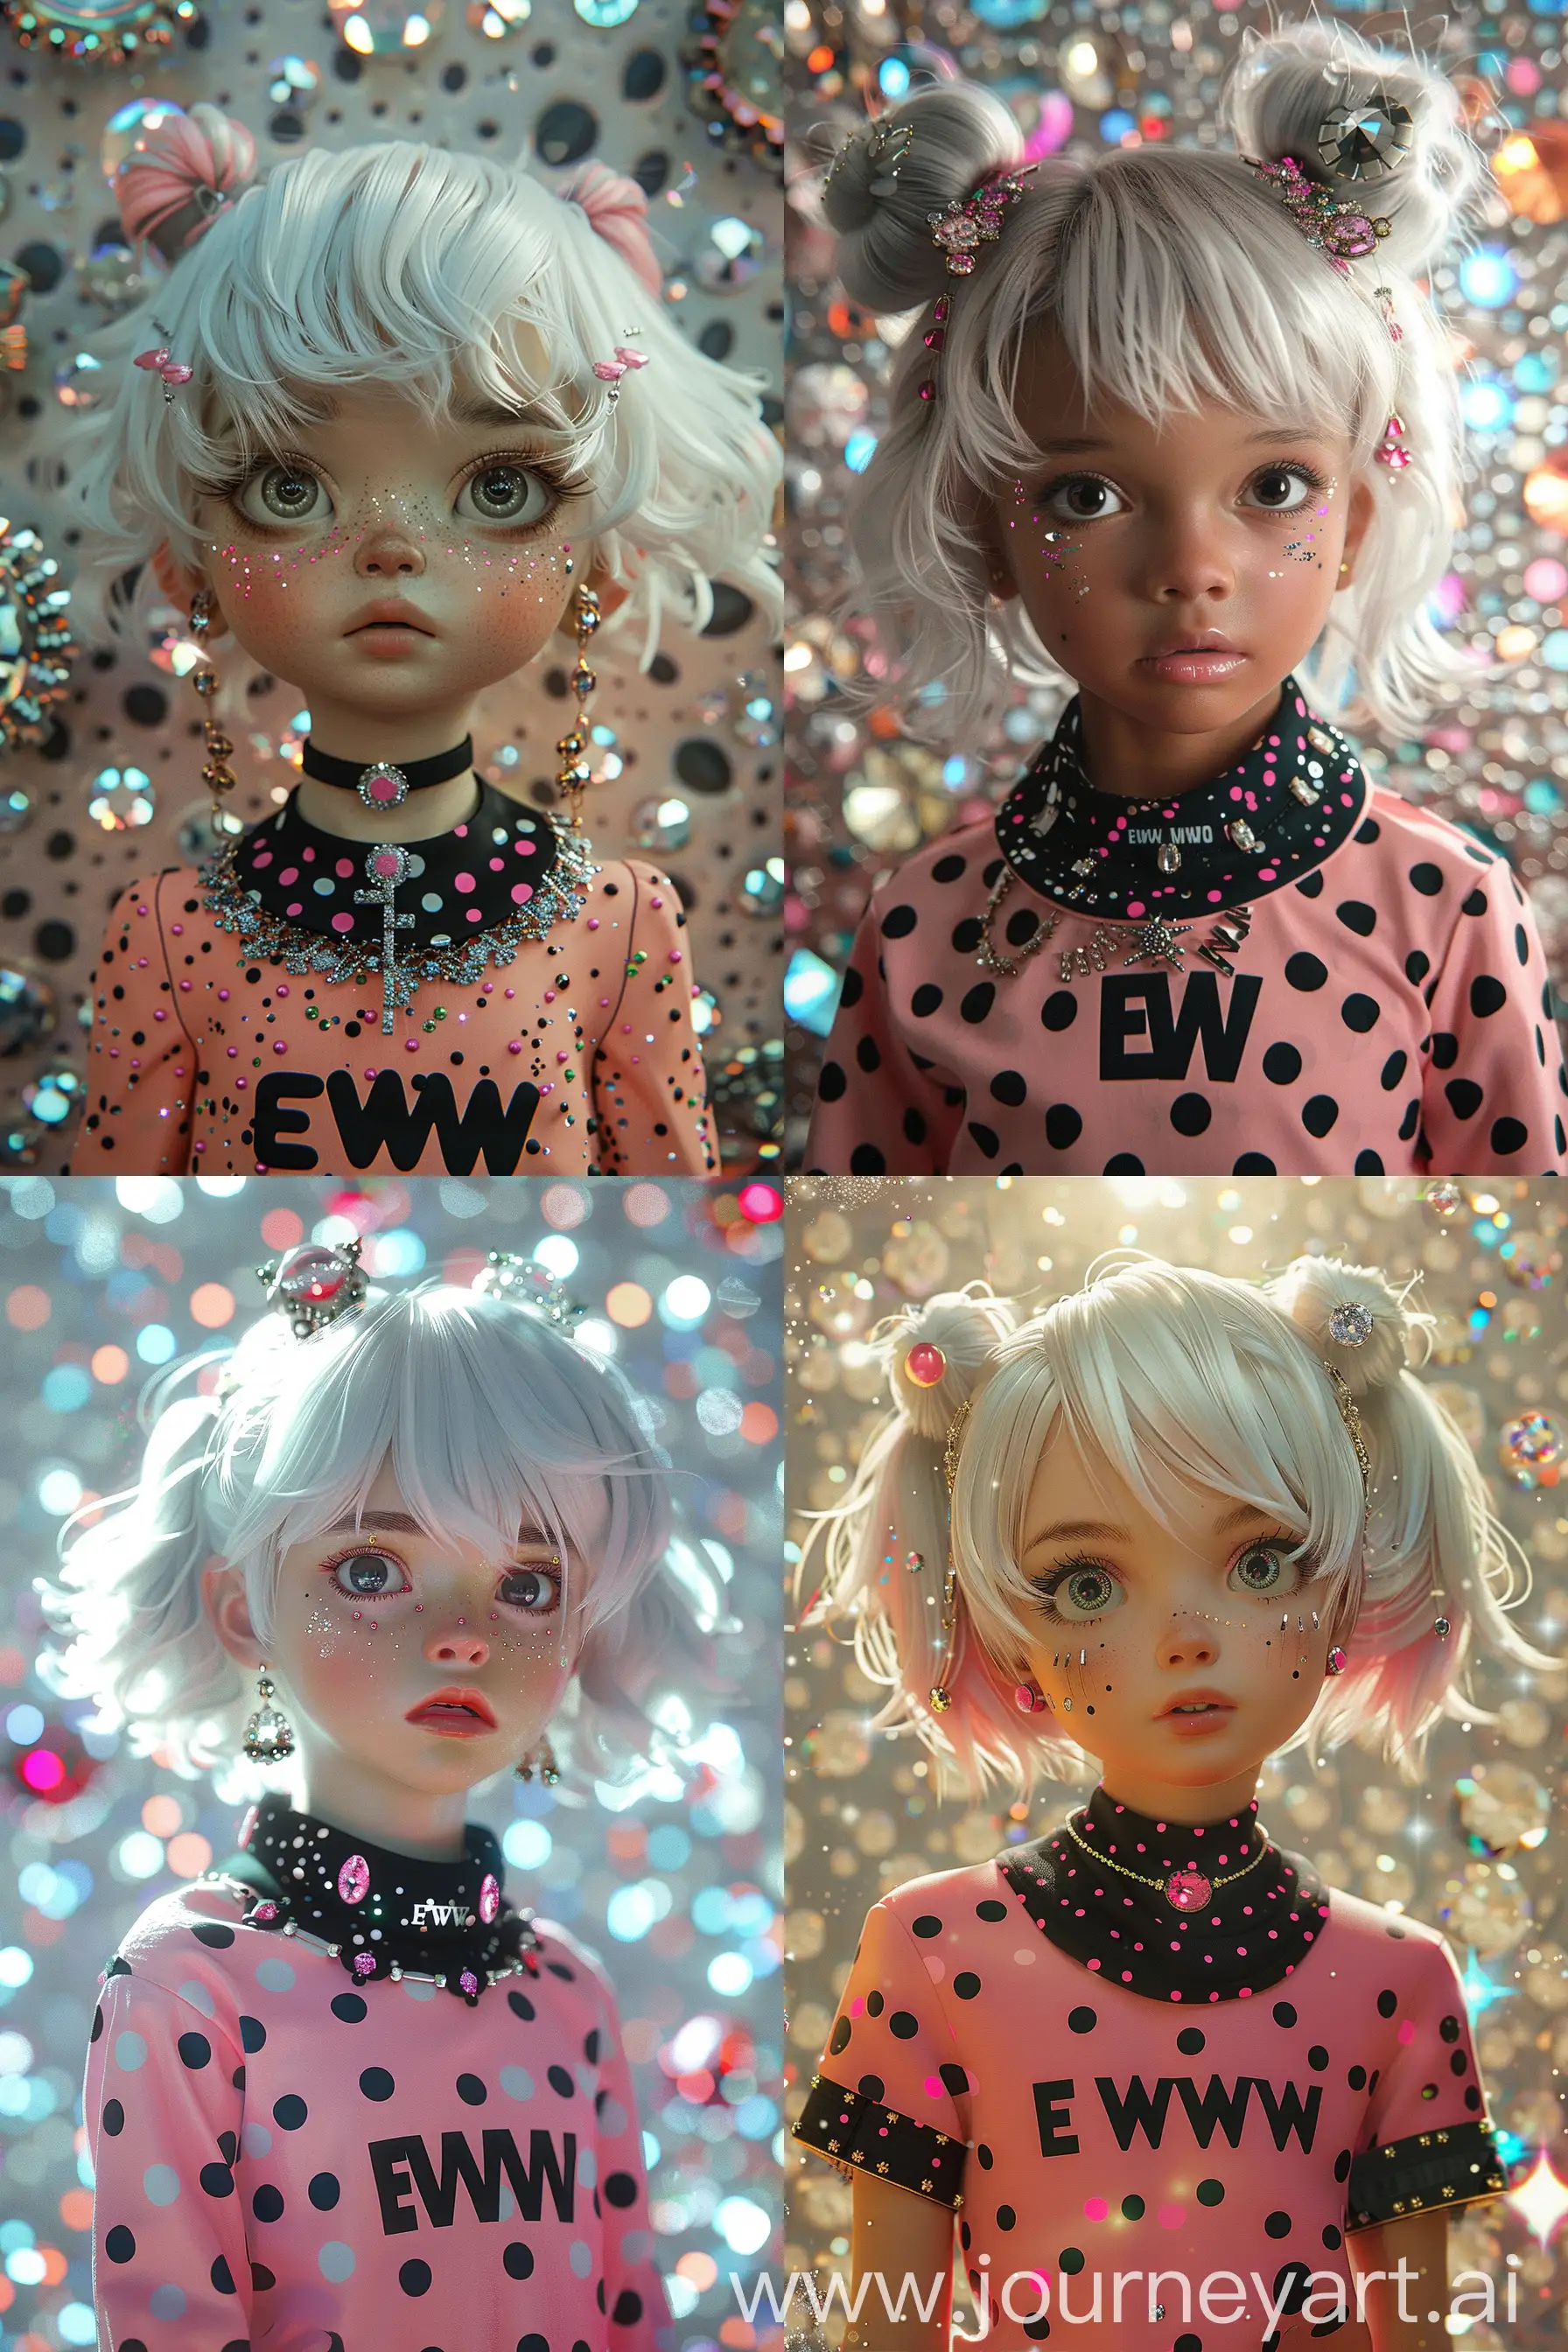 close up, a cute little girl with white hair and pink dots and a black collar with the insription "EWW" and a pink shirt with black dots stands in front of a spottet wall, Everything is a fantasy atmosphere , the girls shirt has finishes and shiny gems and wears a lot of jewelry,in the background there are gems, glitter and diamonds, bright light, --ar 2:3 --stylize 250 --style raw